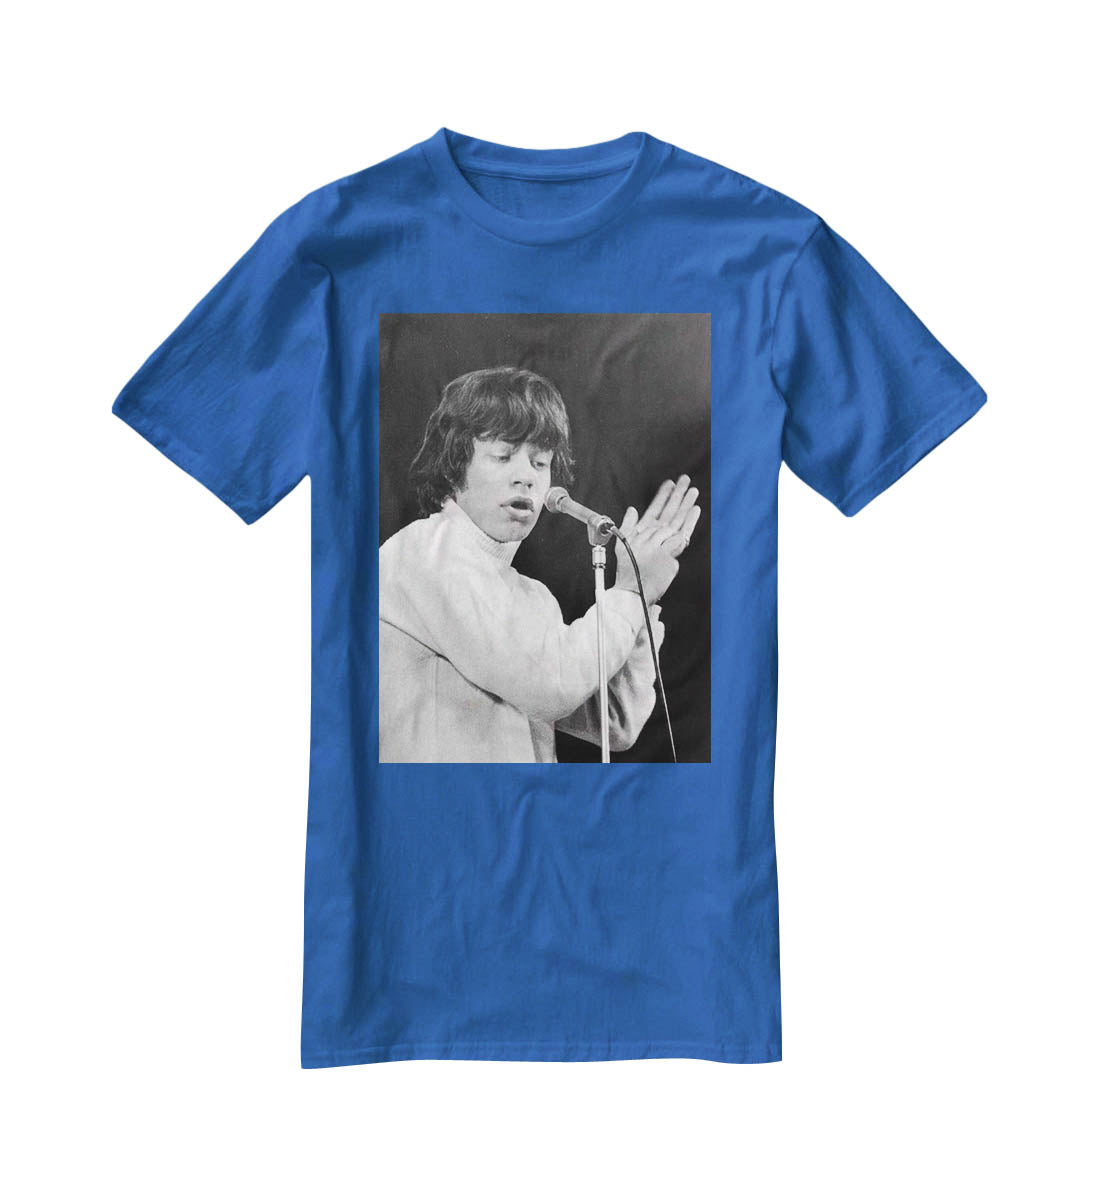 Mick Jagger on stage in 1965 T-Shirt - Canvas Art Rocks - 2